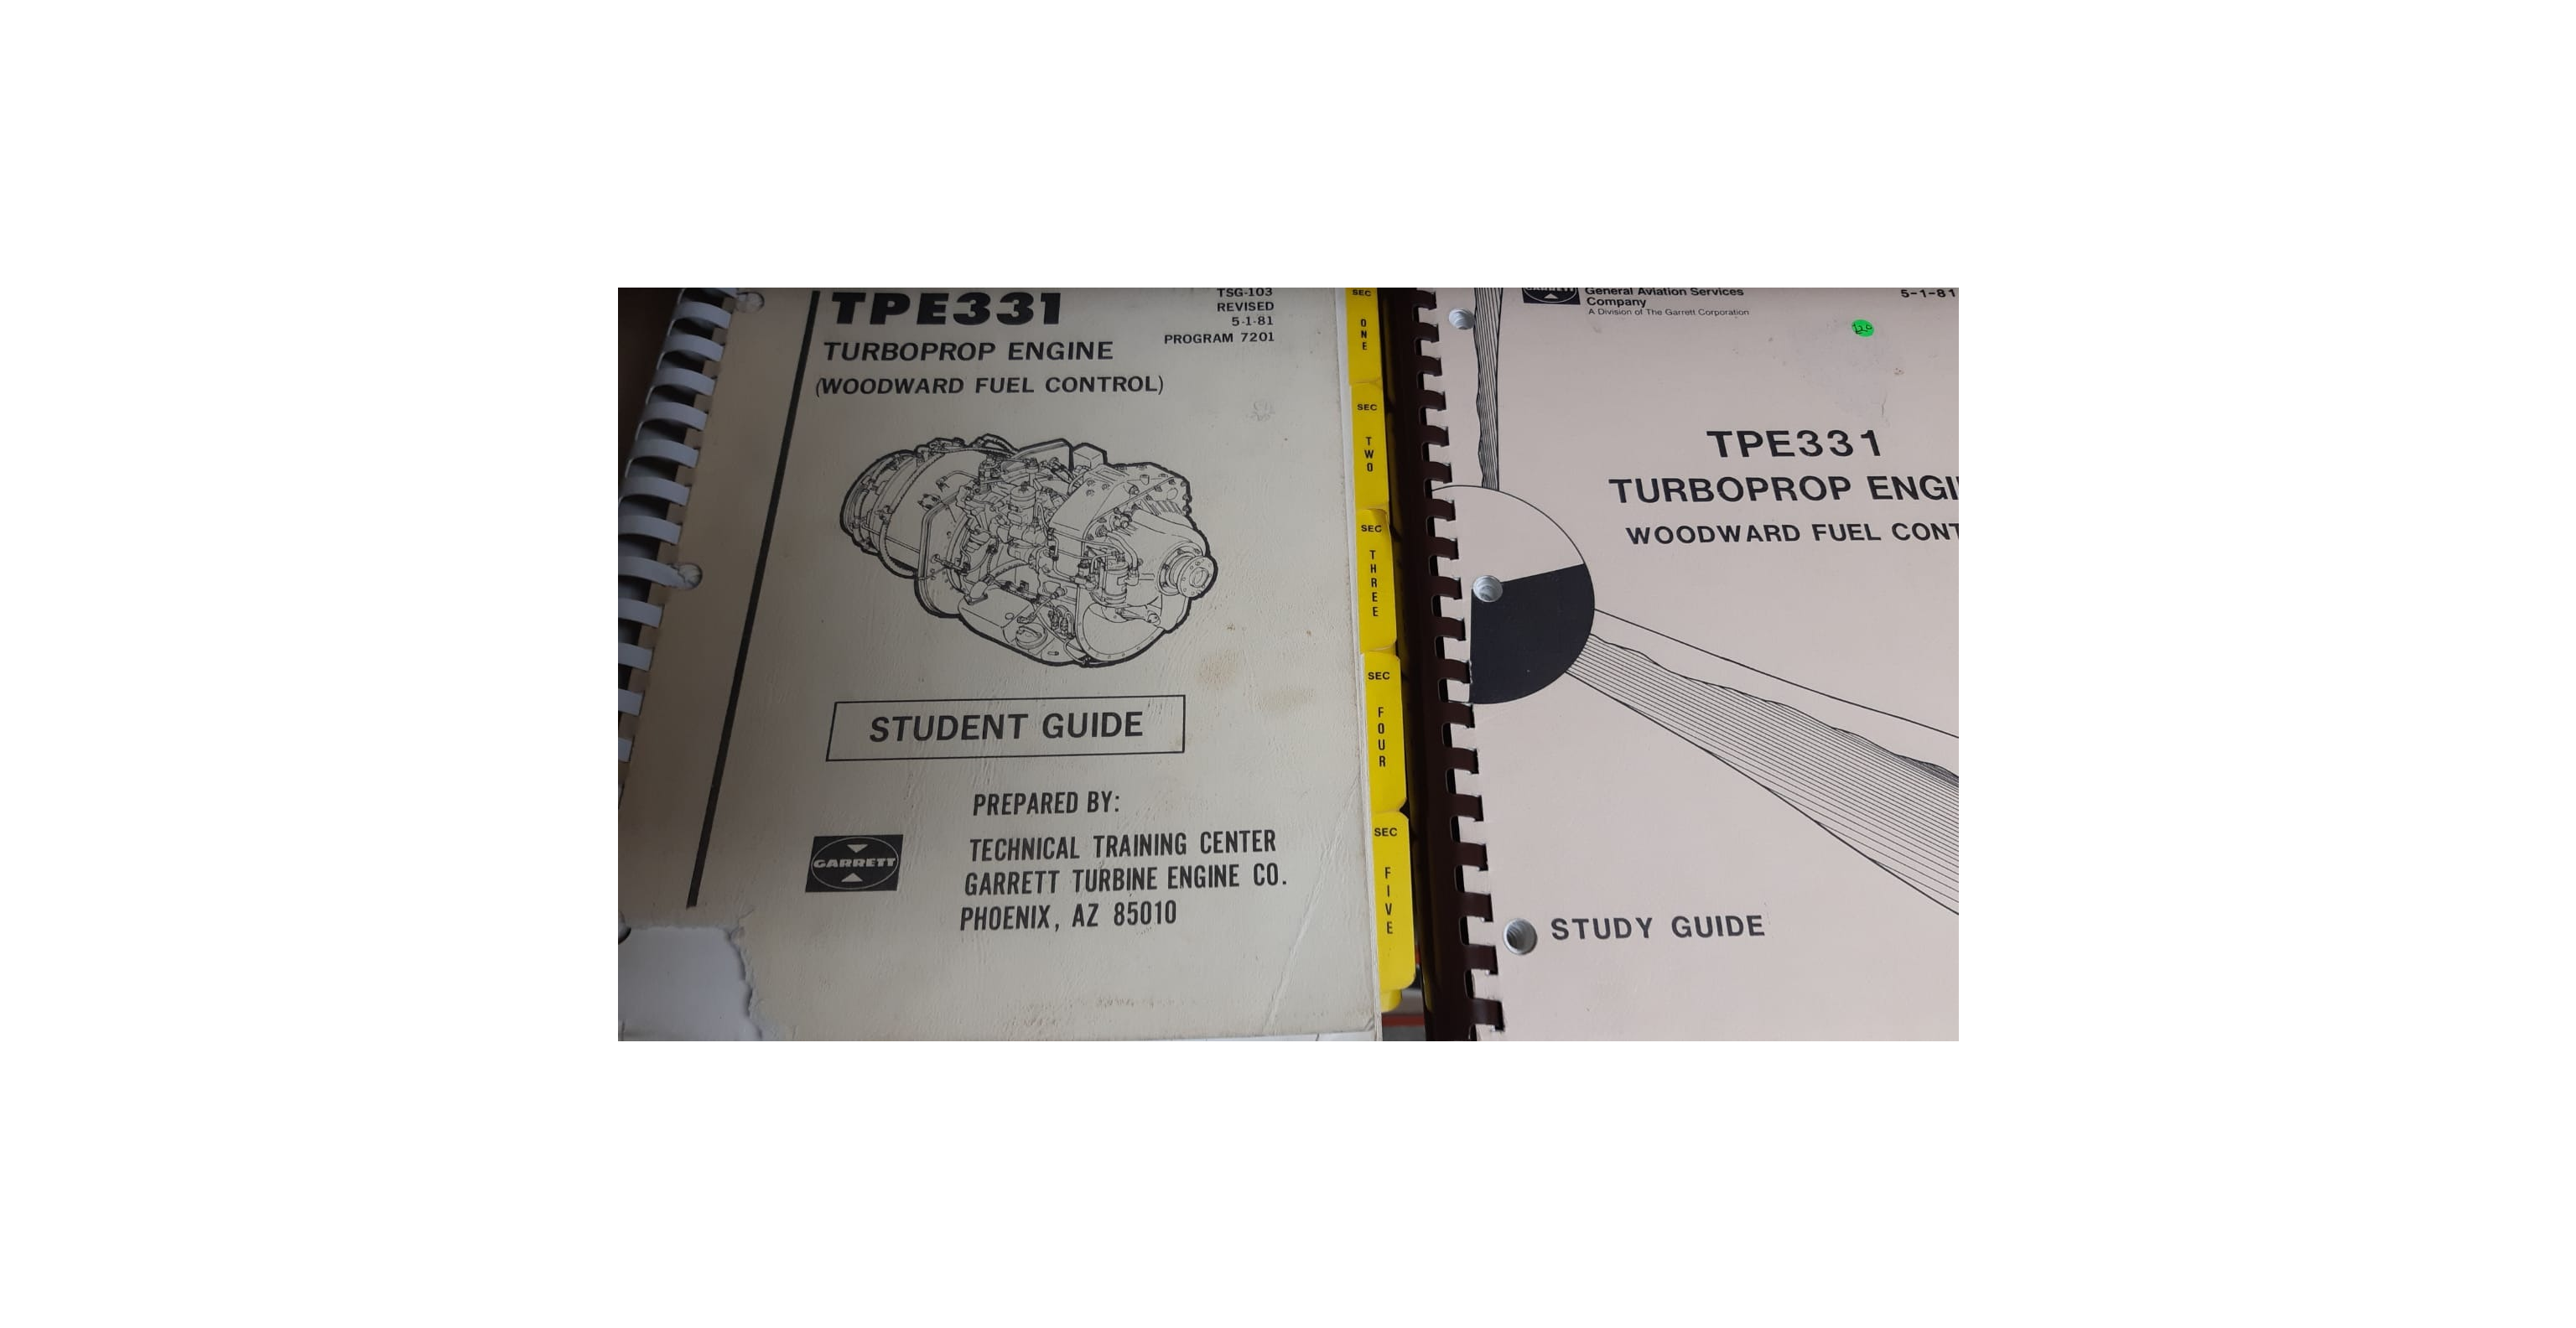 2 TPE331 Turboprop Engine Study Guides